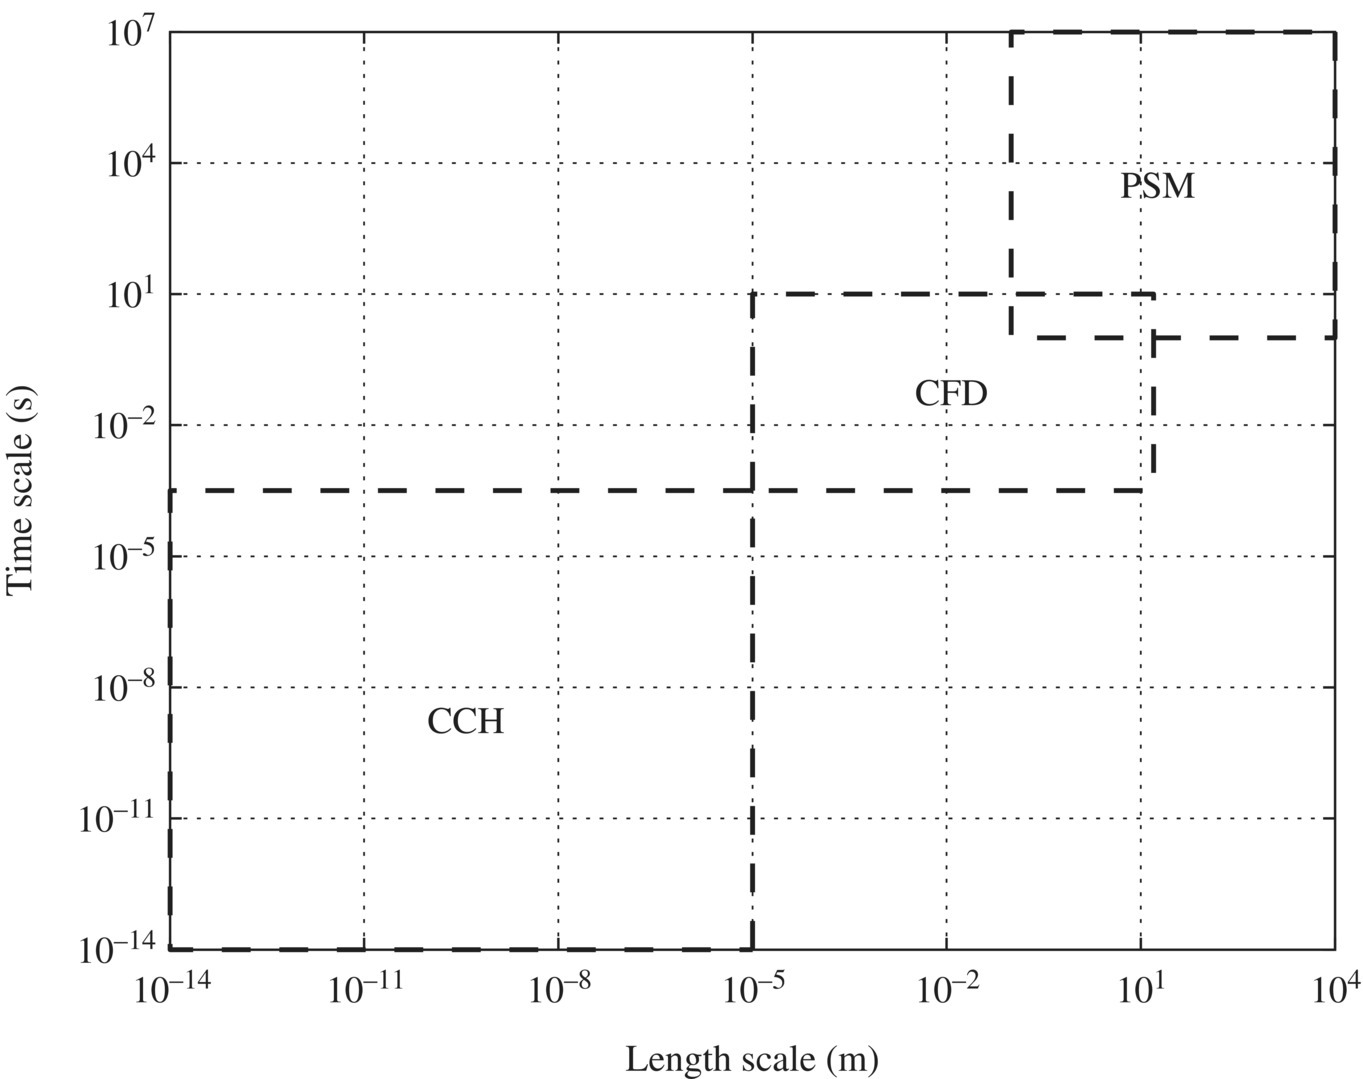 Time scale vs. length scale, with 3 regions (dashed boxes) labeled CCH, CFD, and PSM.